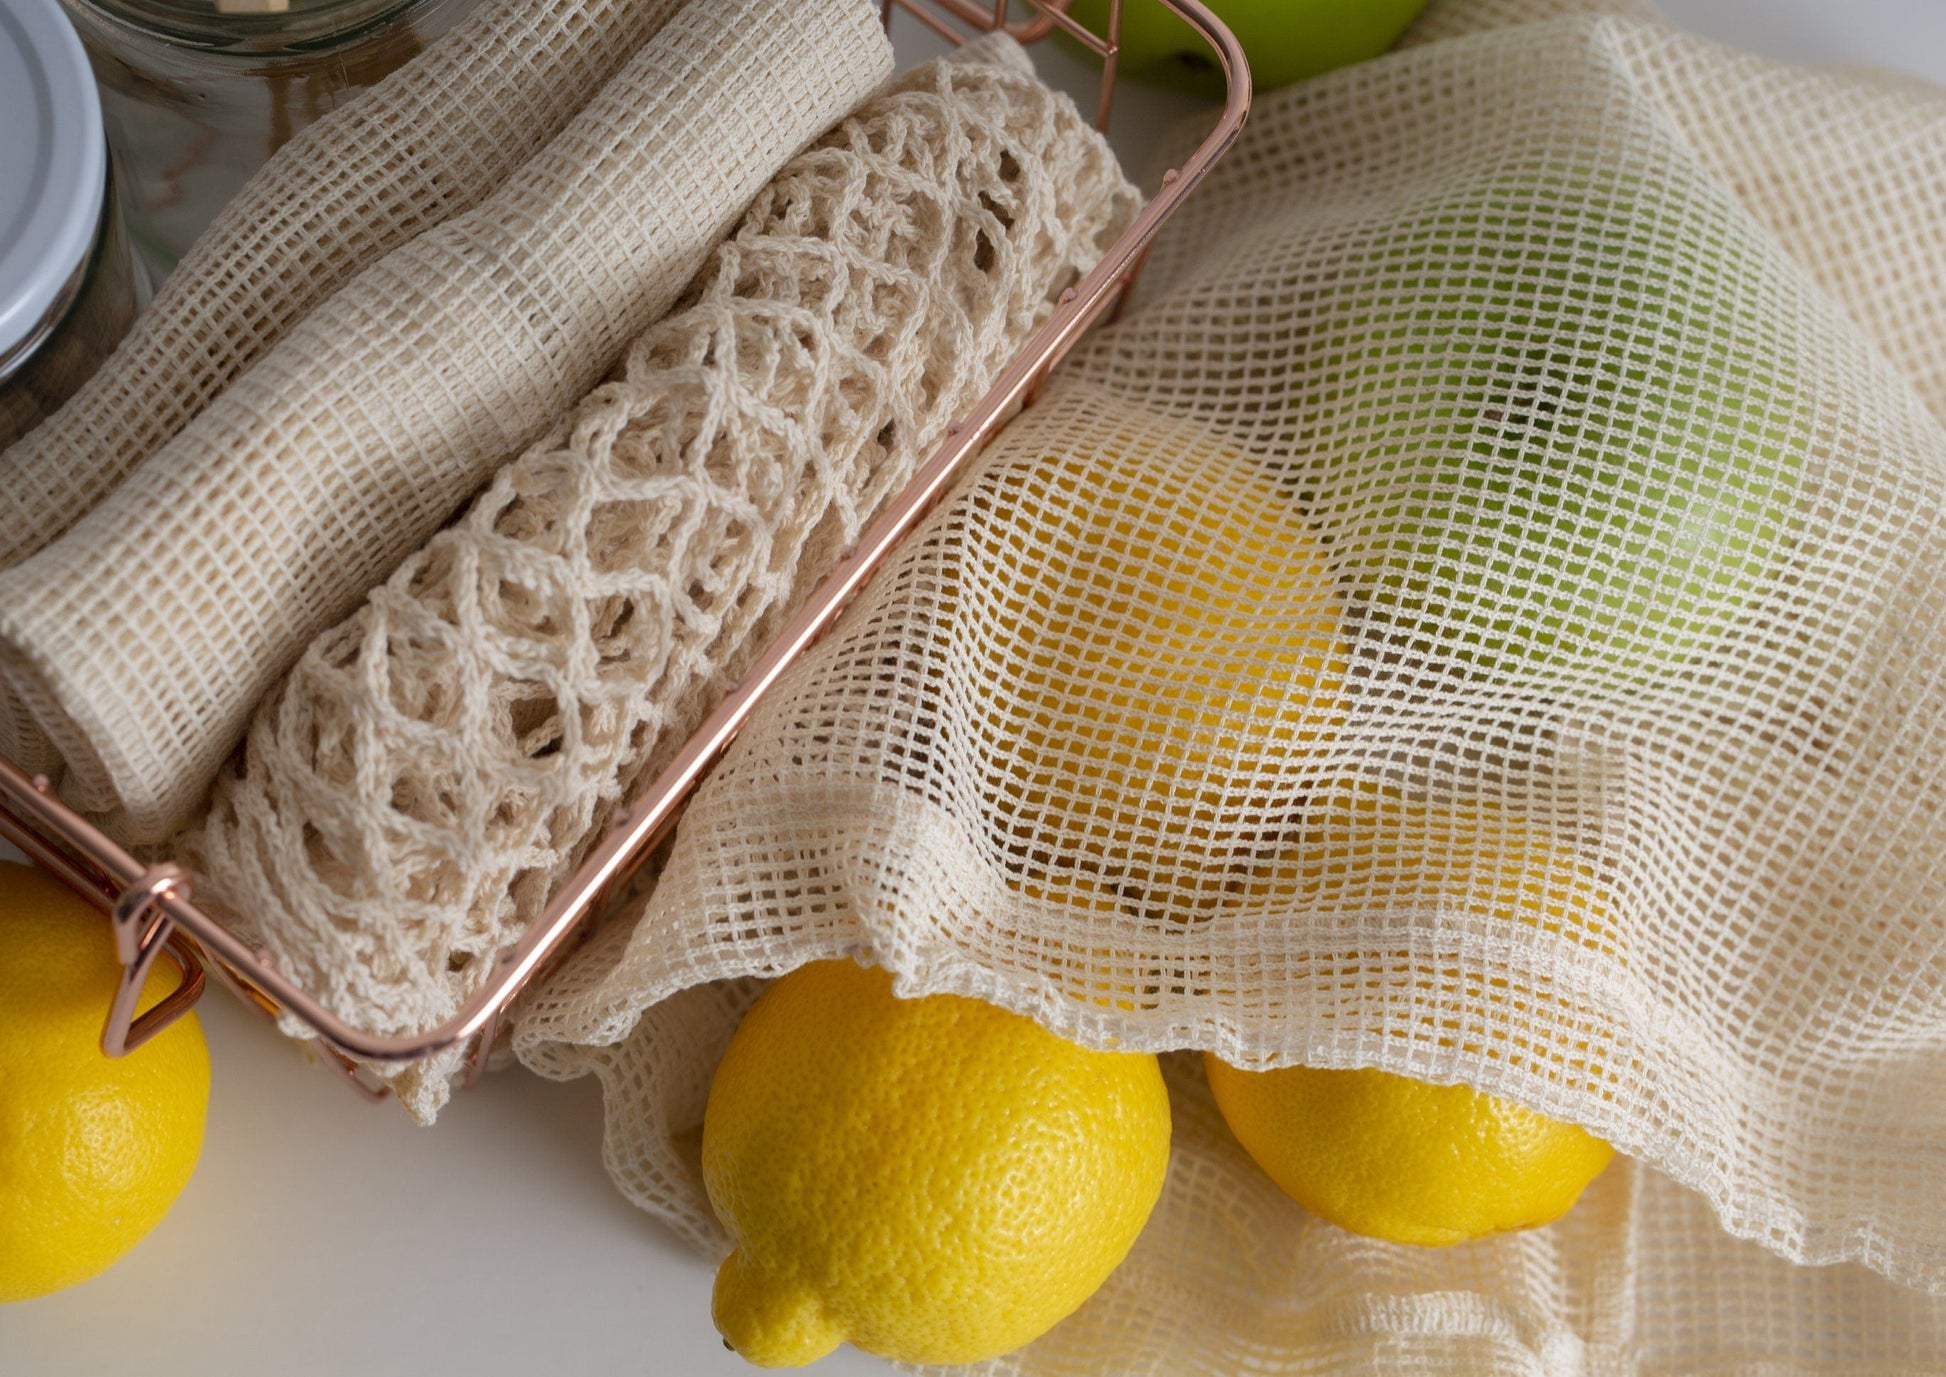 sustainable mesh market bags for grocery shopping